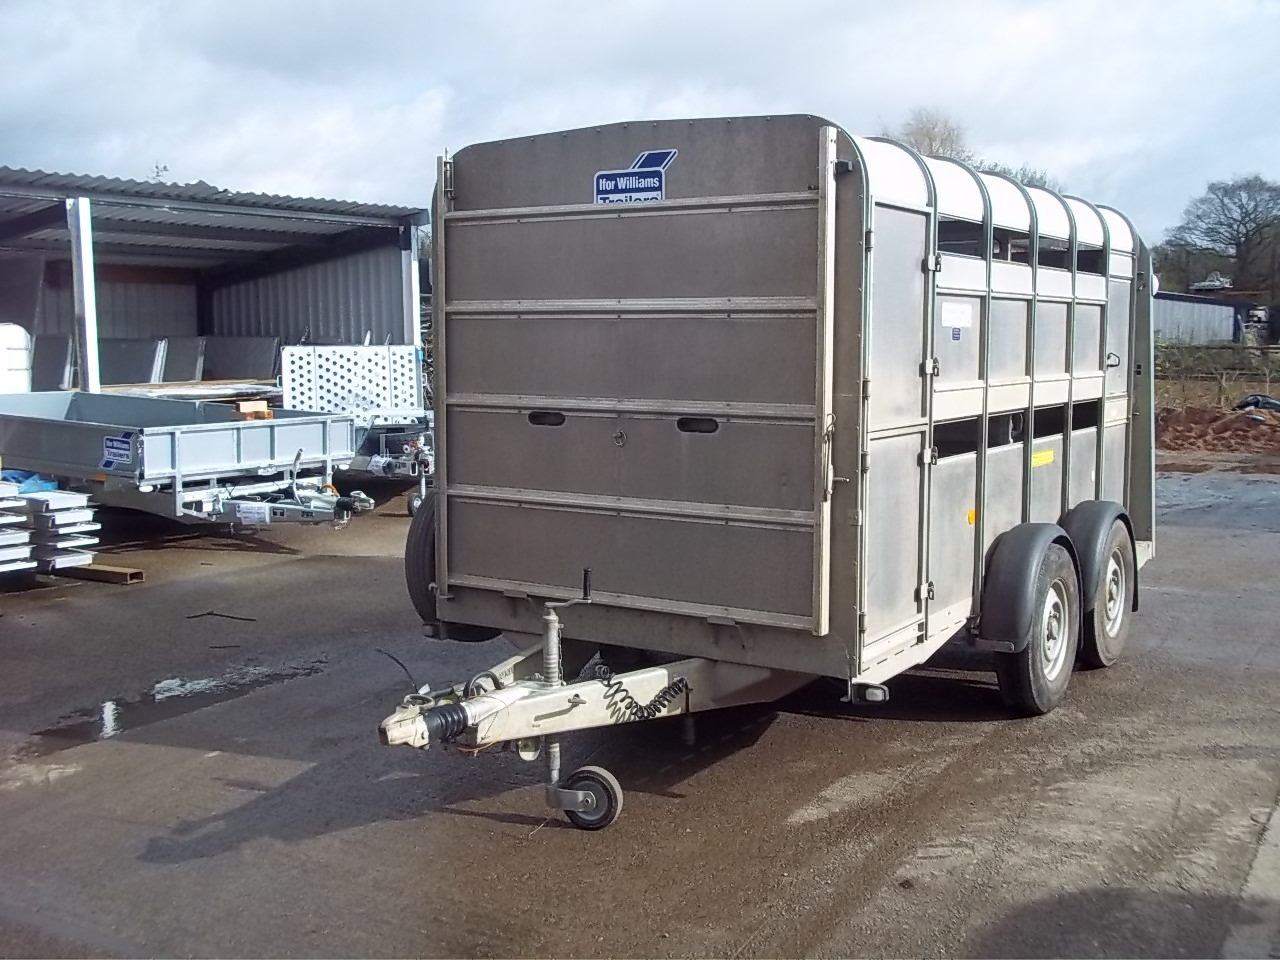 For Sale: 2019 Ifor williams TA510 12FT livestock trailer with easyload decks